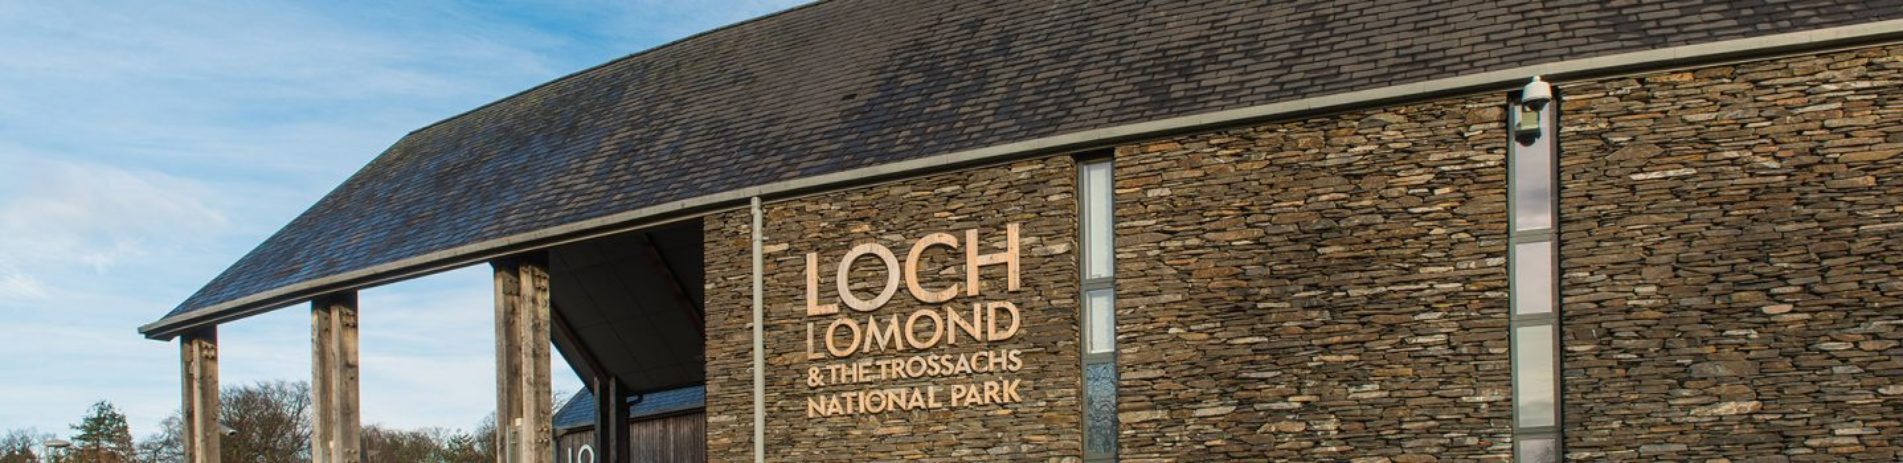 loch-lomond-and-trossachs-national-park-authority-headquarters-building-made-of-stone-and-with-slate-roof-logo-prominent-next-to-entrance